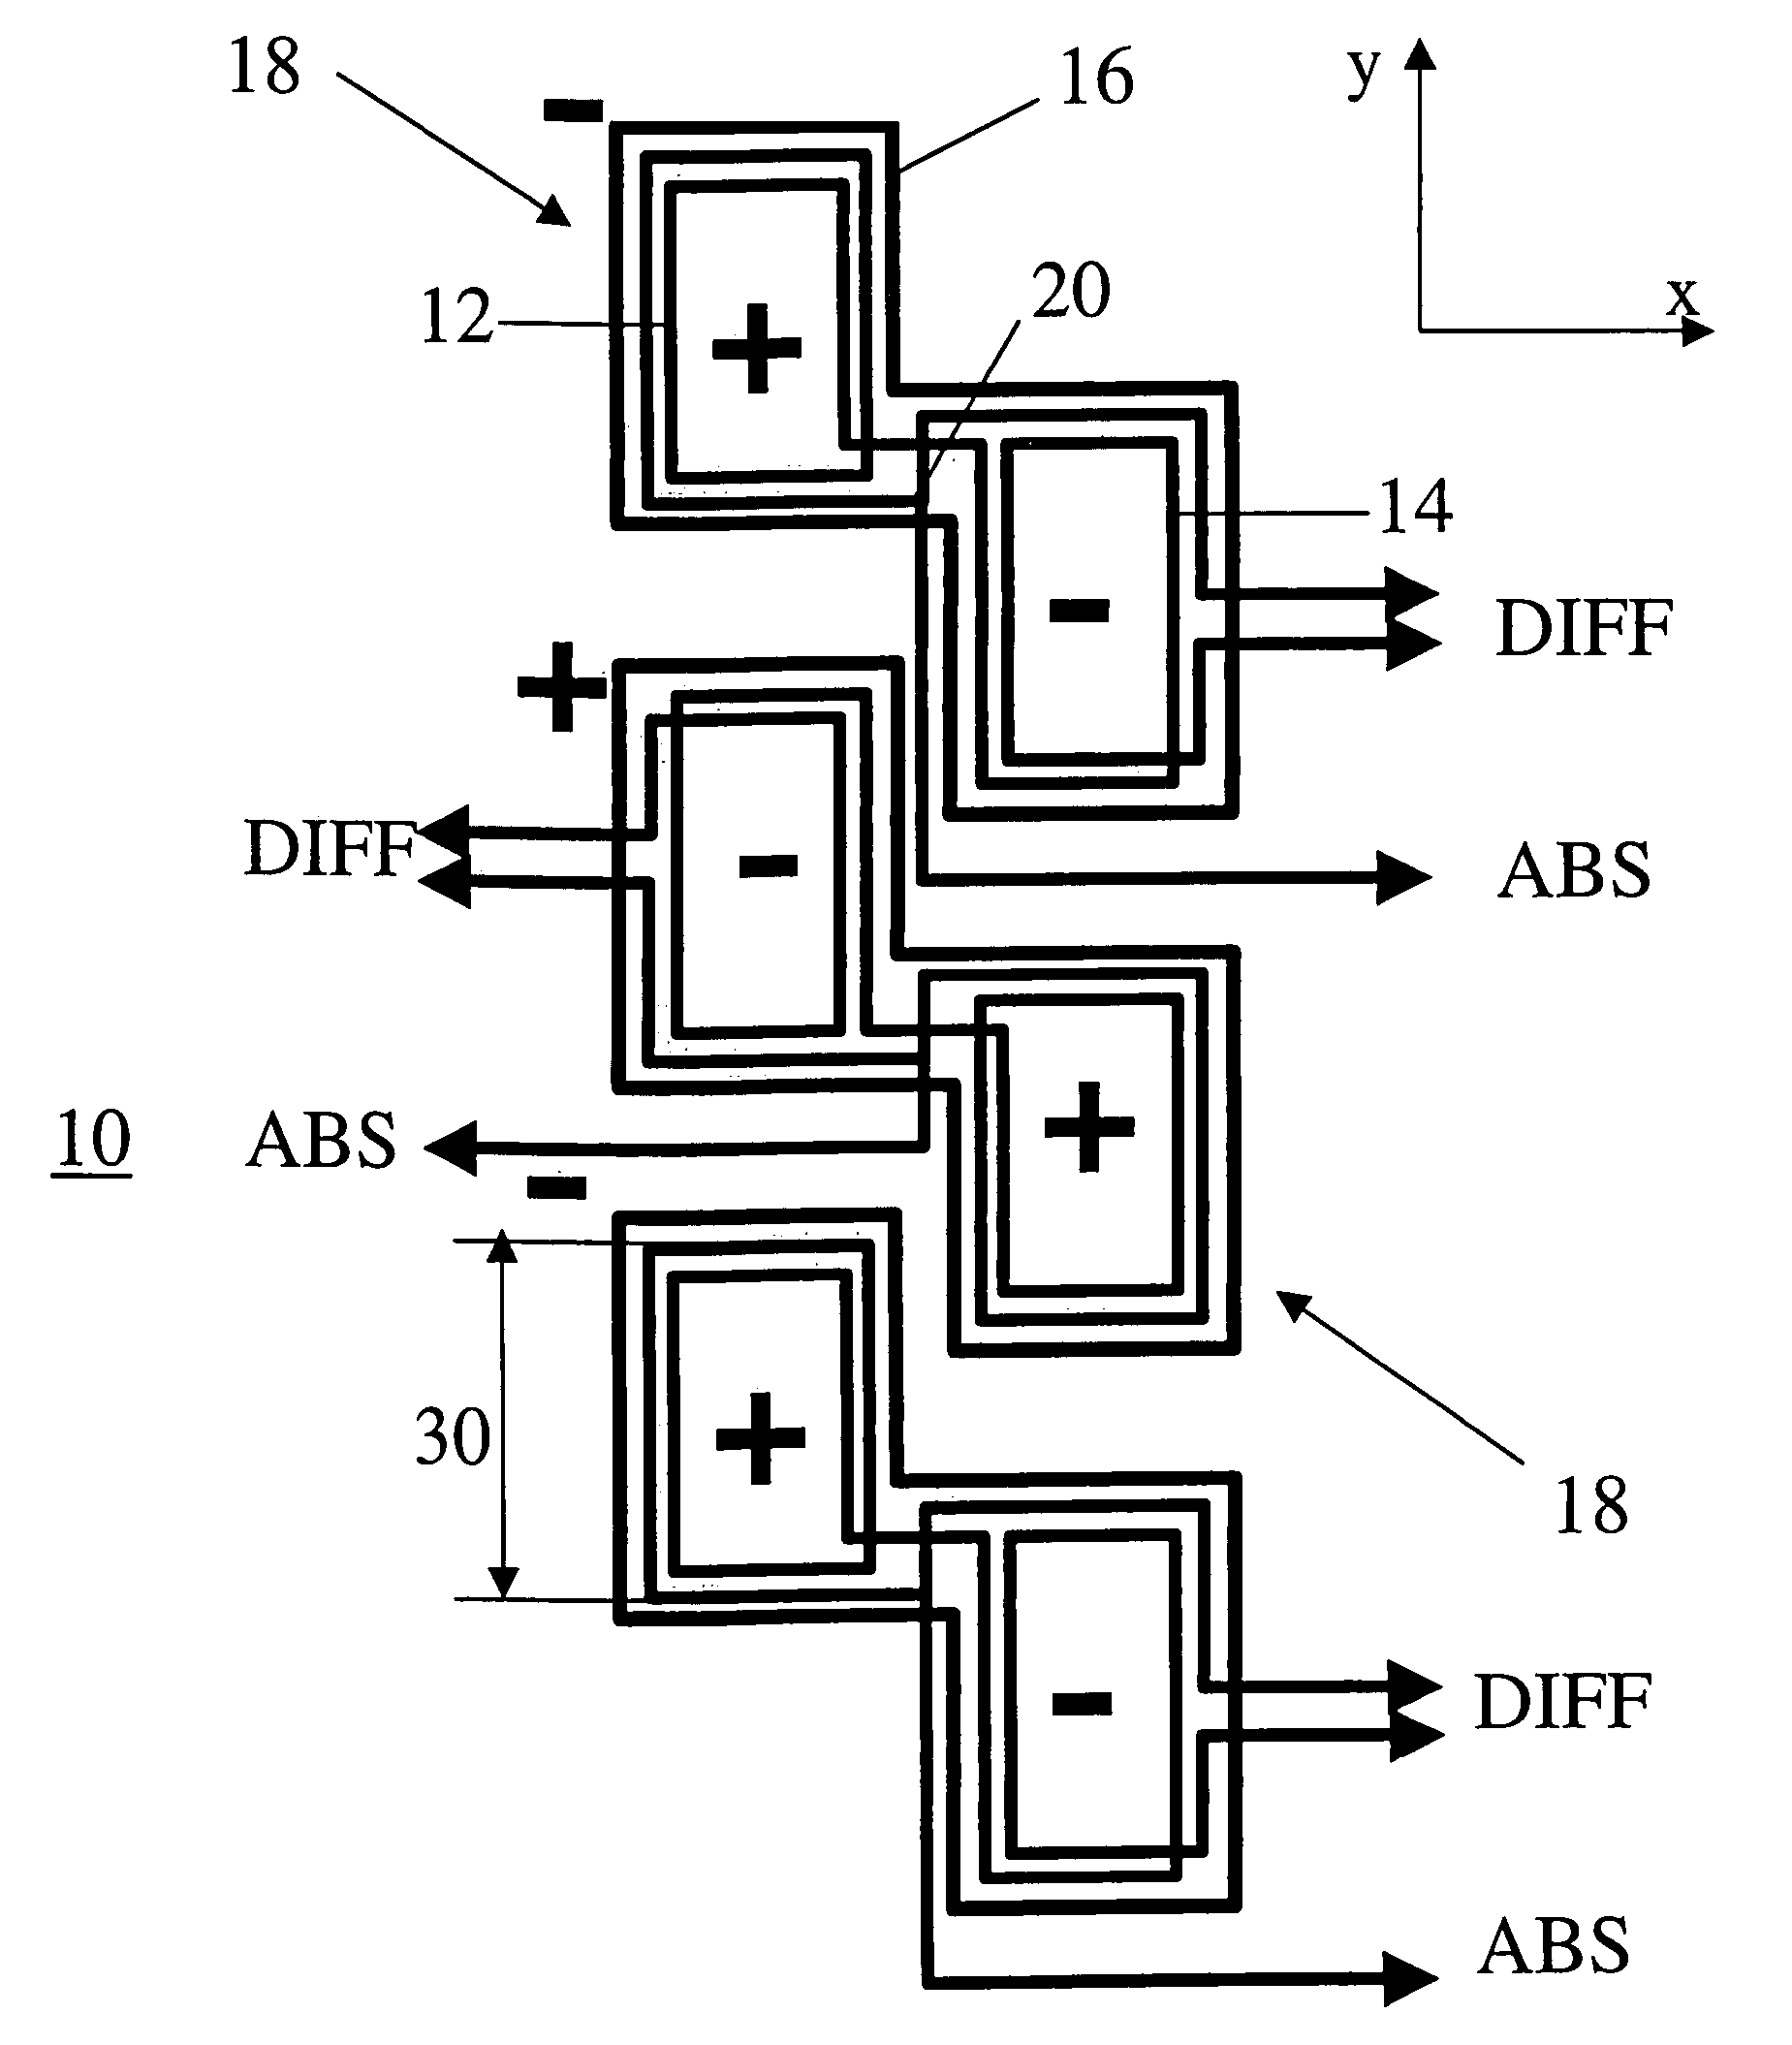 Omnidirectional eddy current probe and inspection system